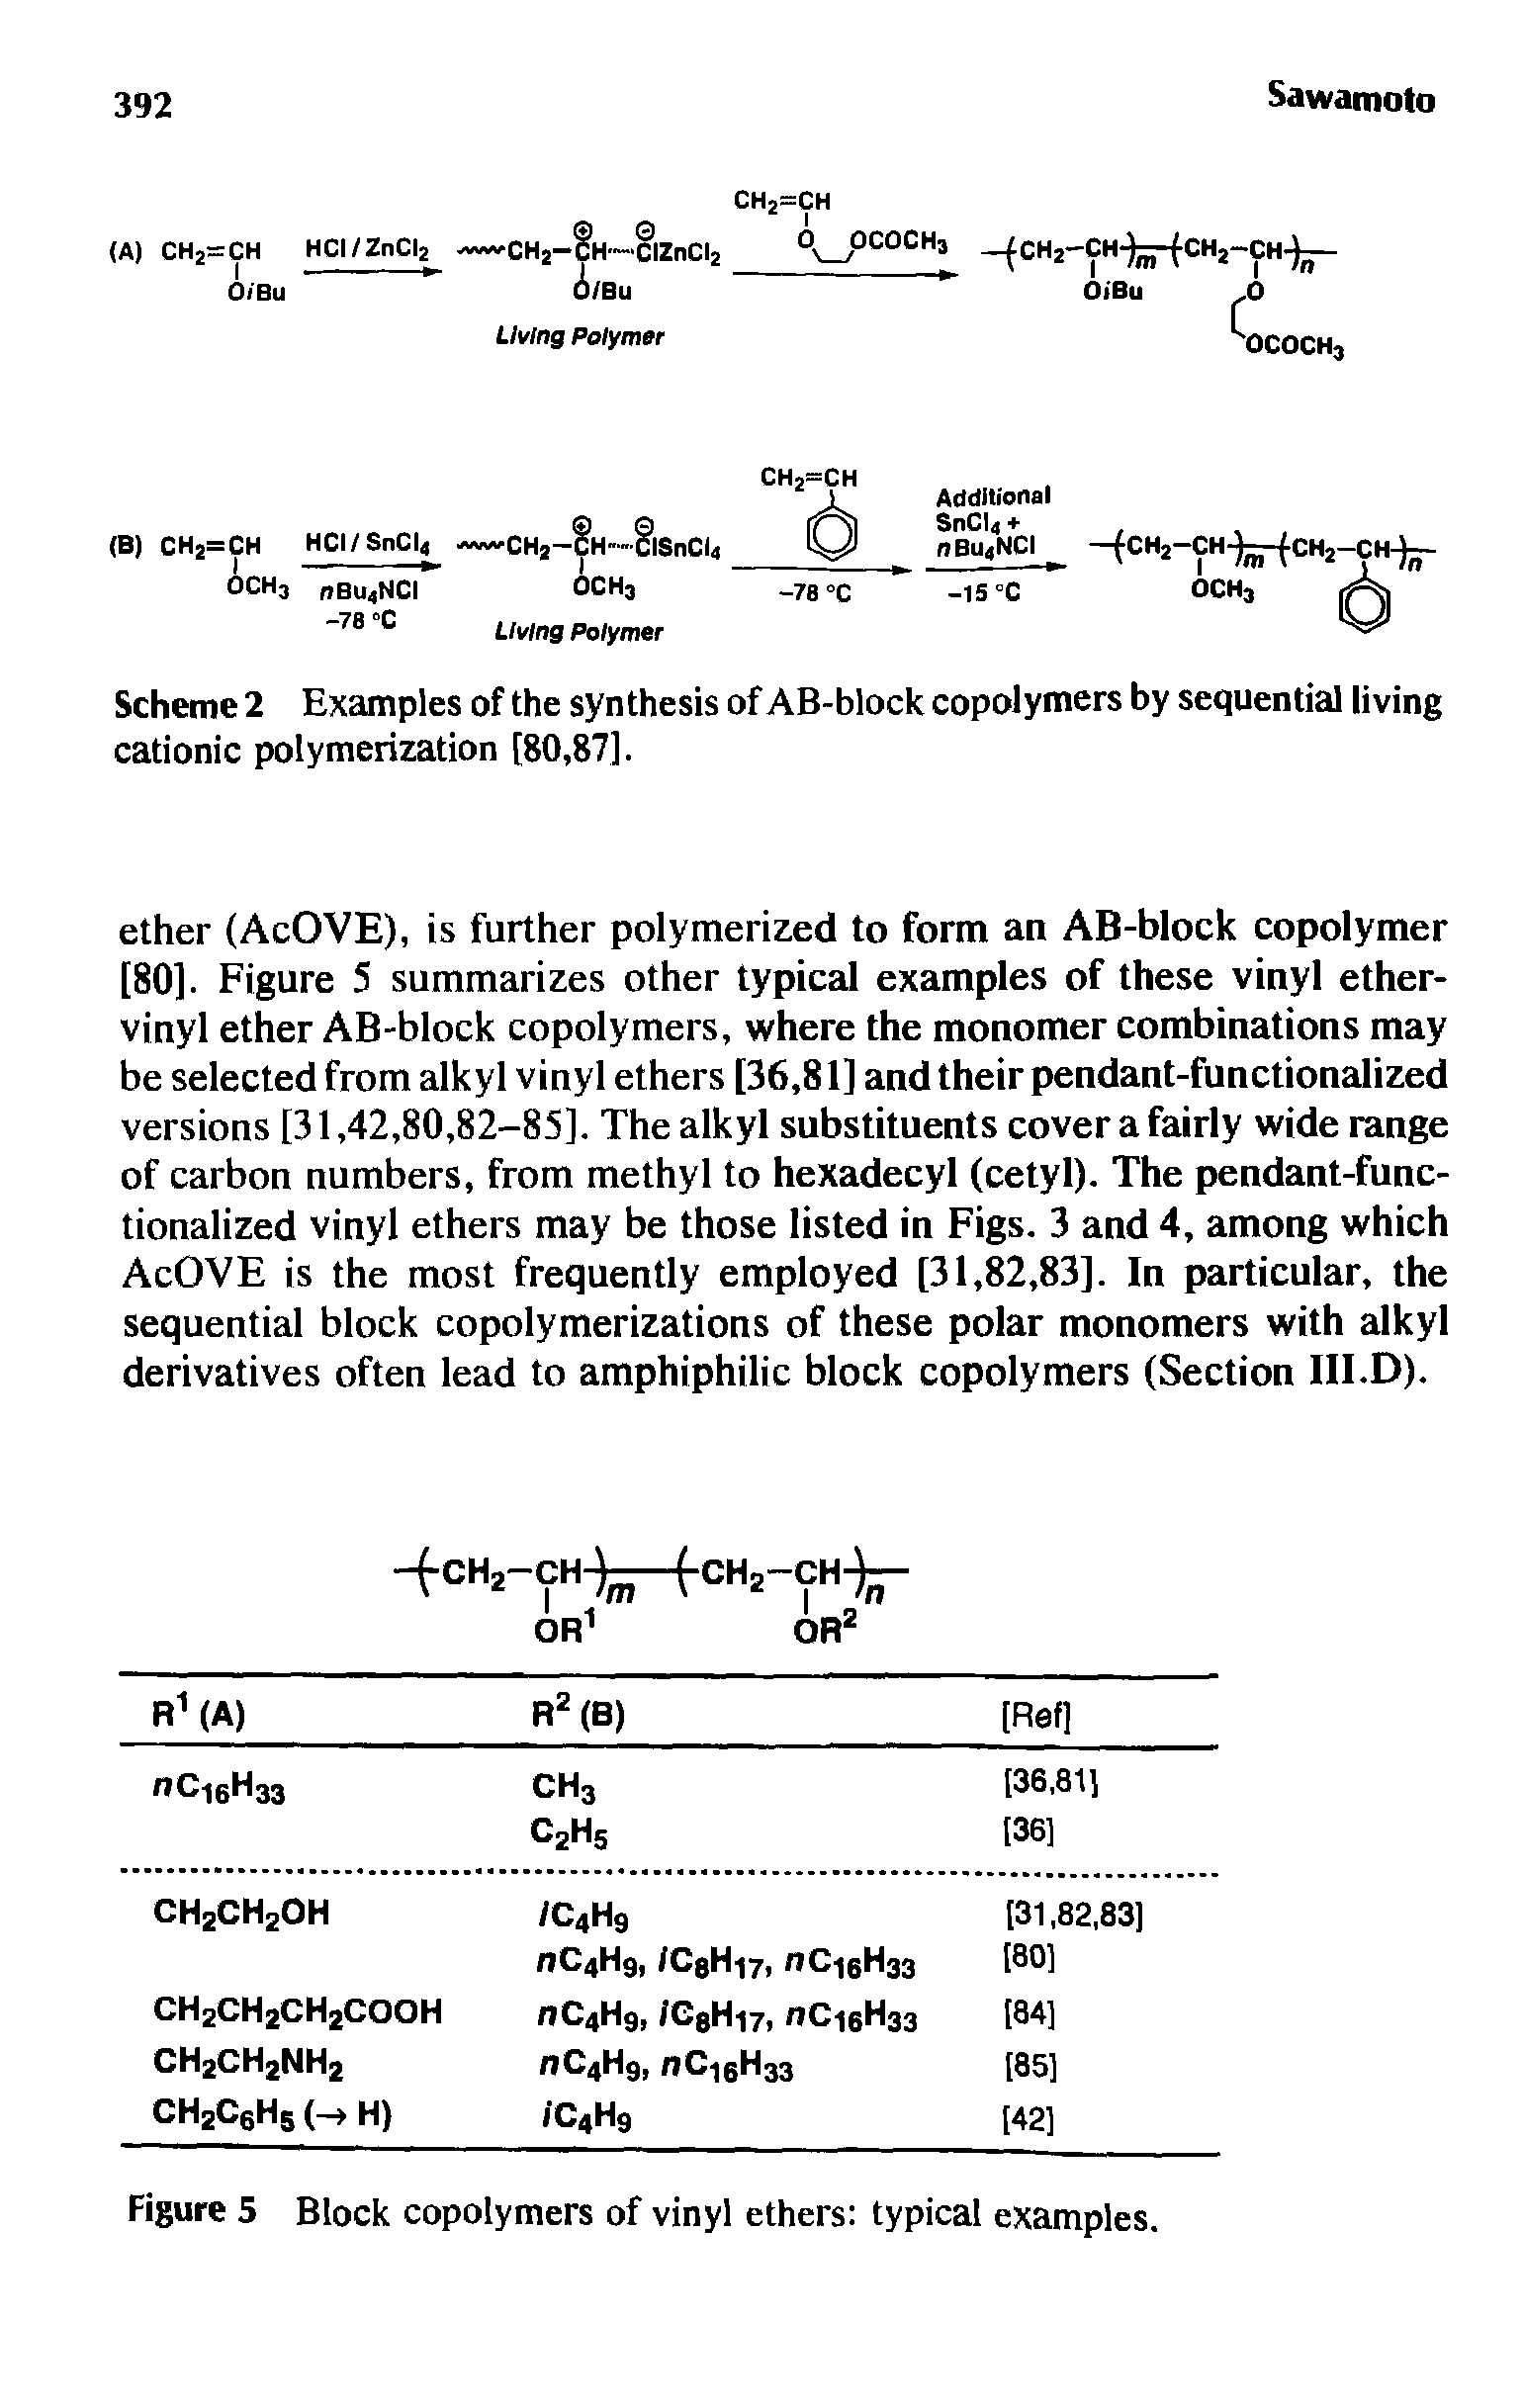 Scheme 2 Examples of the synthesis of AB-block copolymers by sequential living cationic polymerization [80,87].